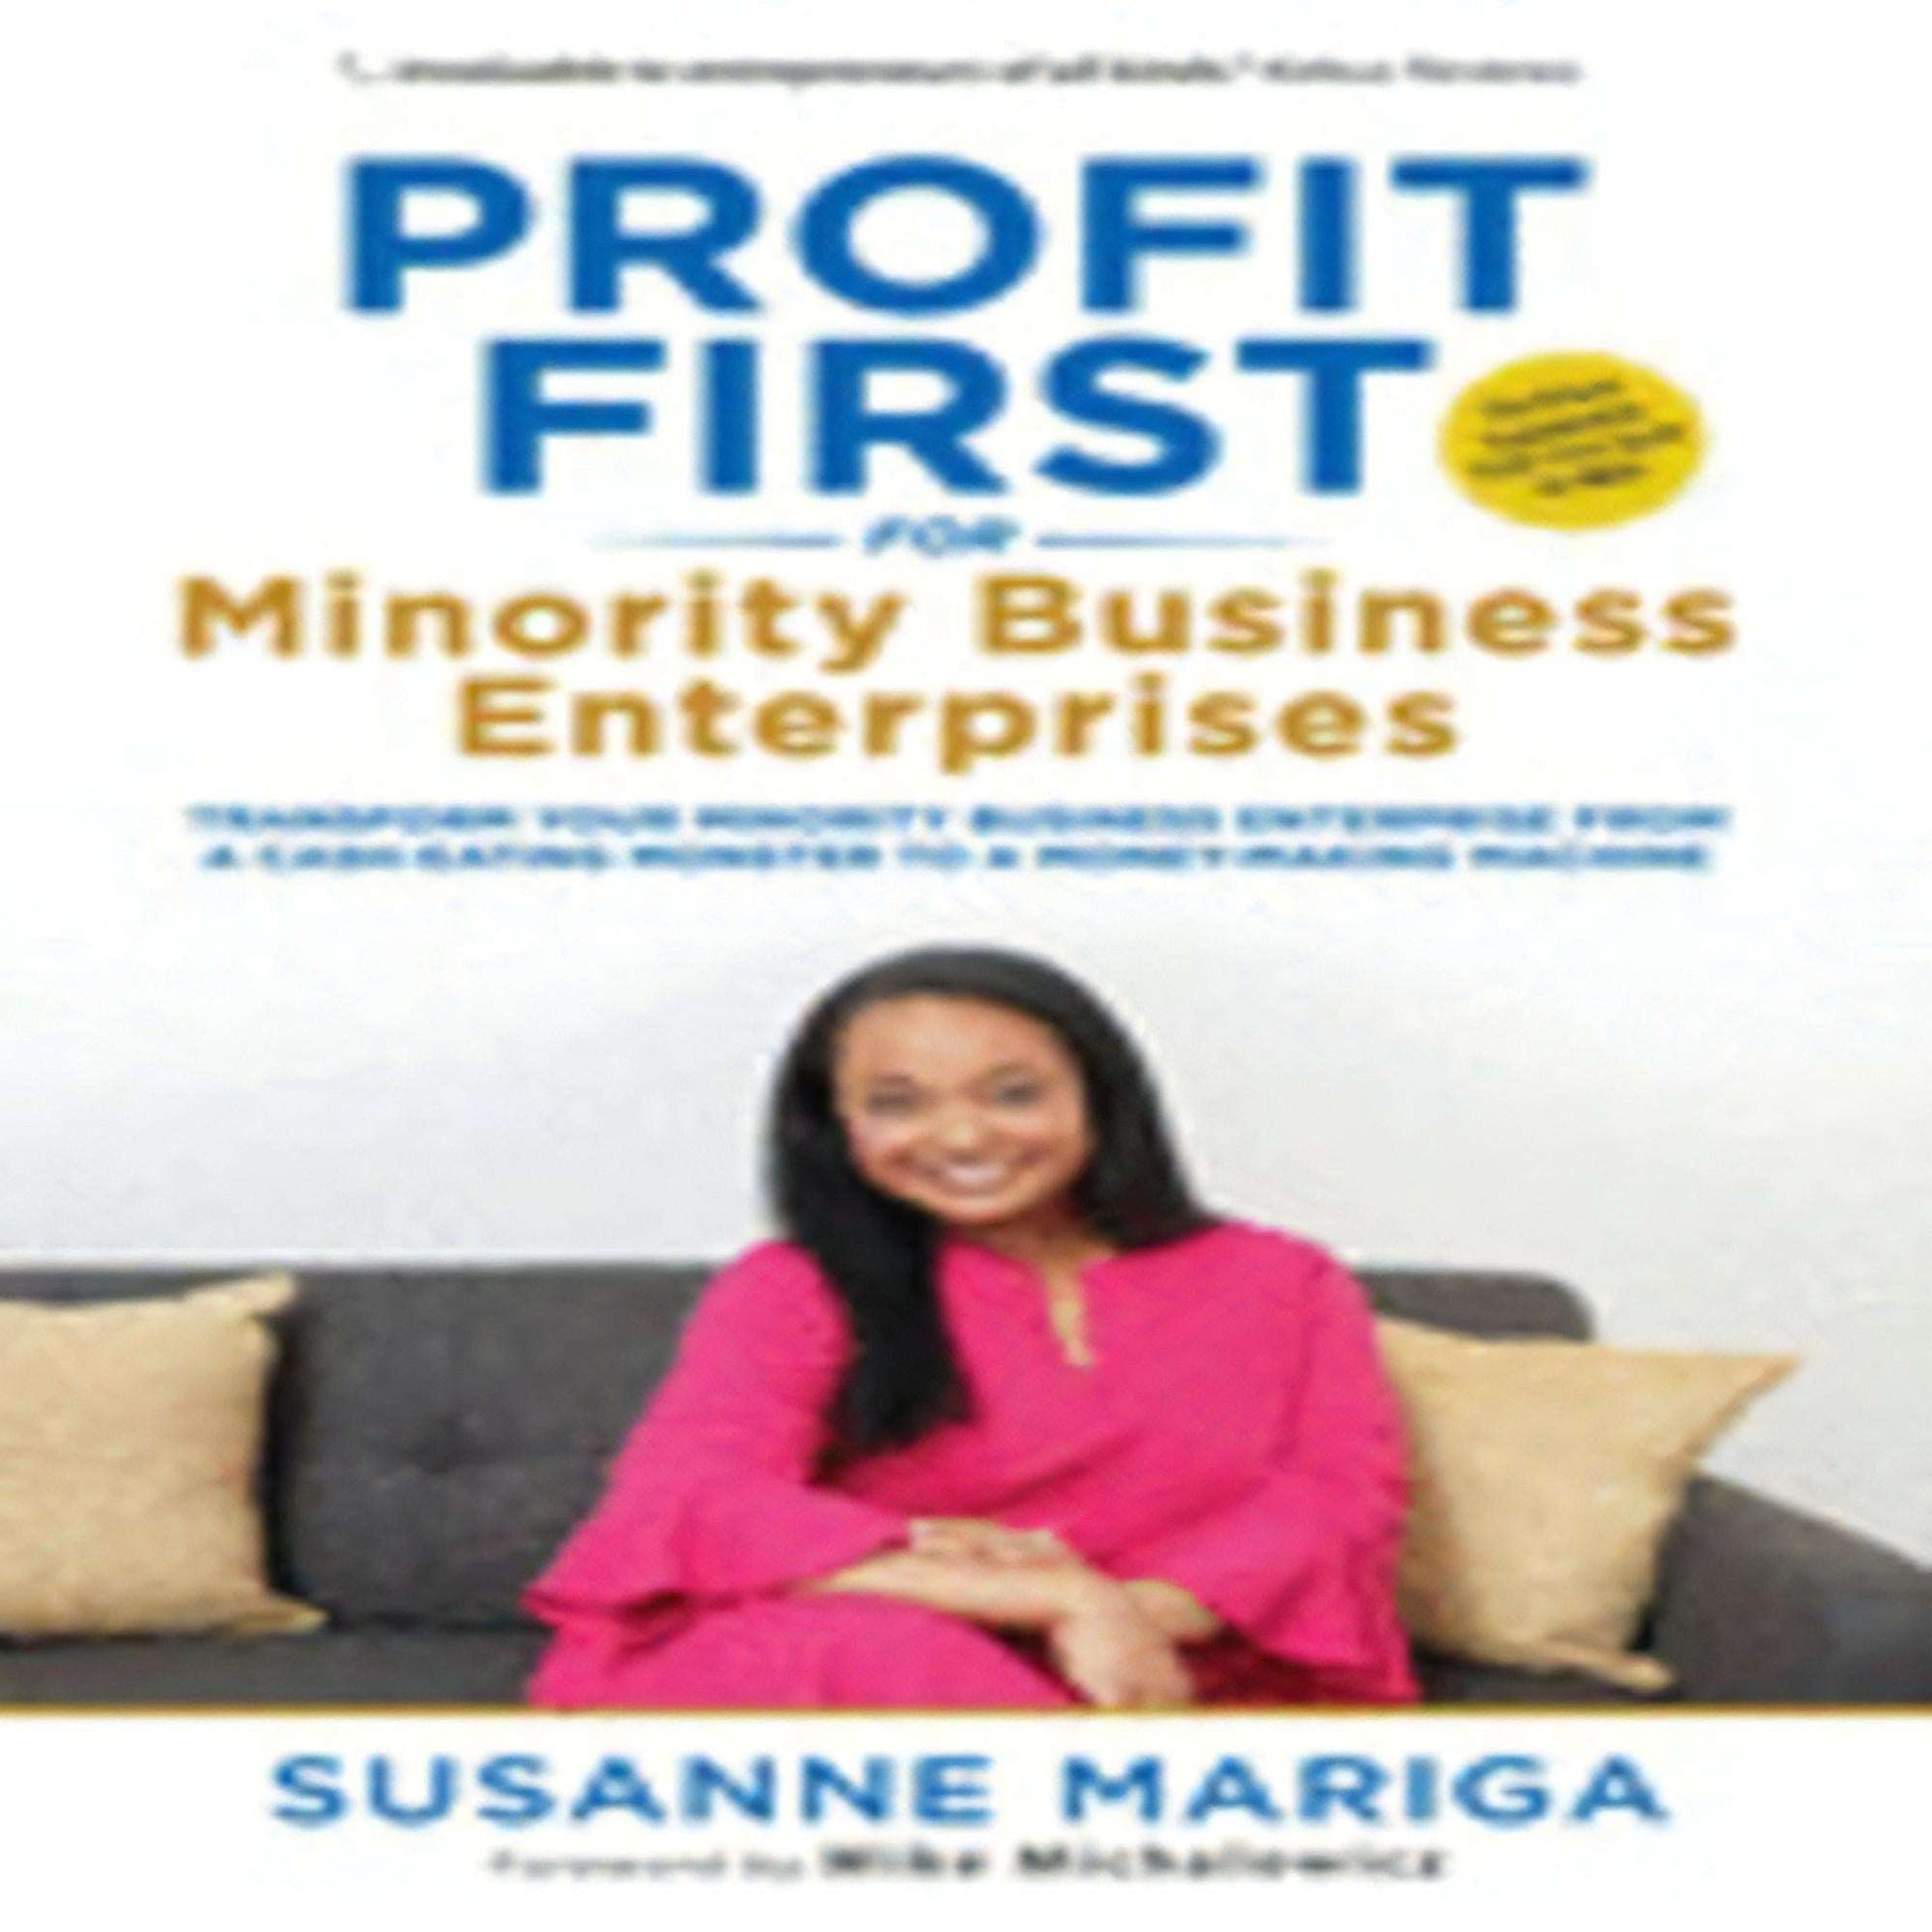 Profit First For Minority Business Enterprises273-050623-9781735775906DPGBOOKSTORE.COM. Today's Bestsellers.